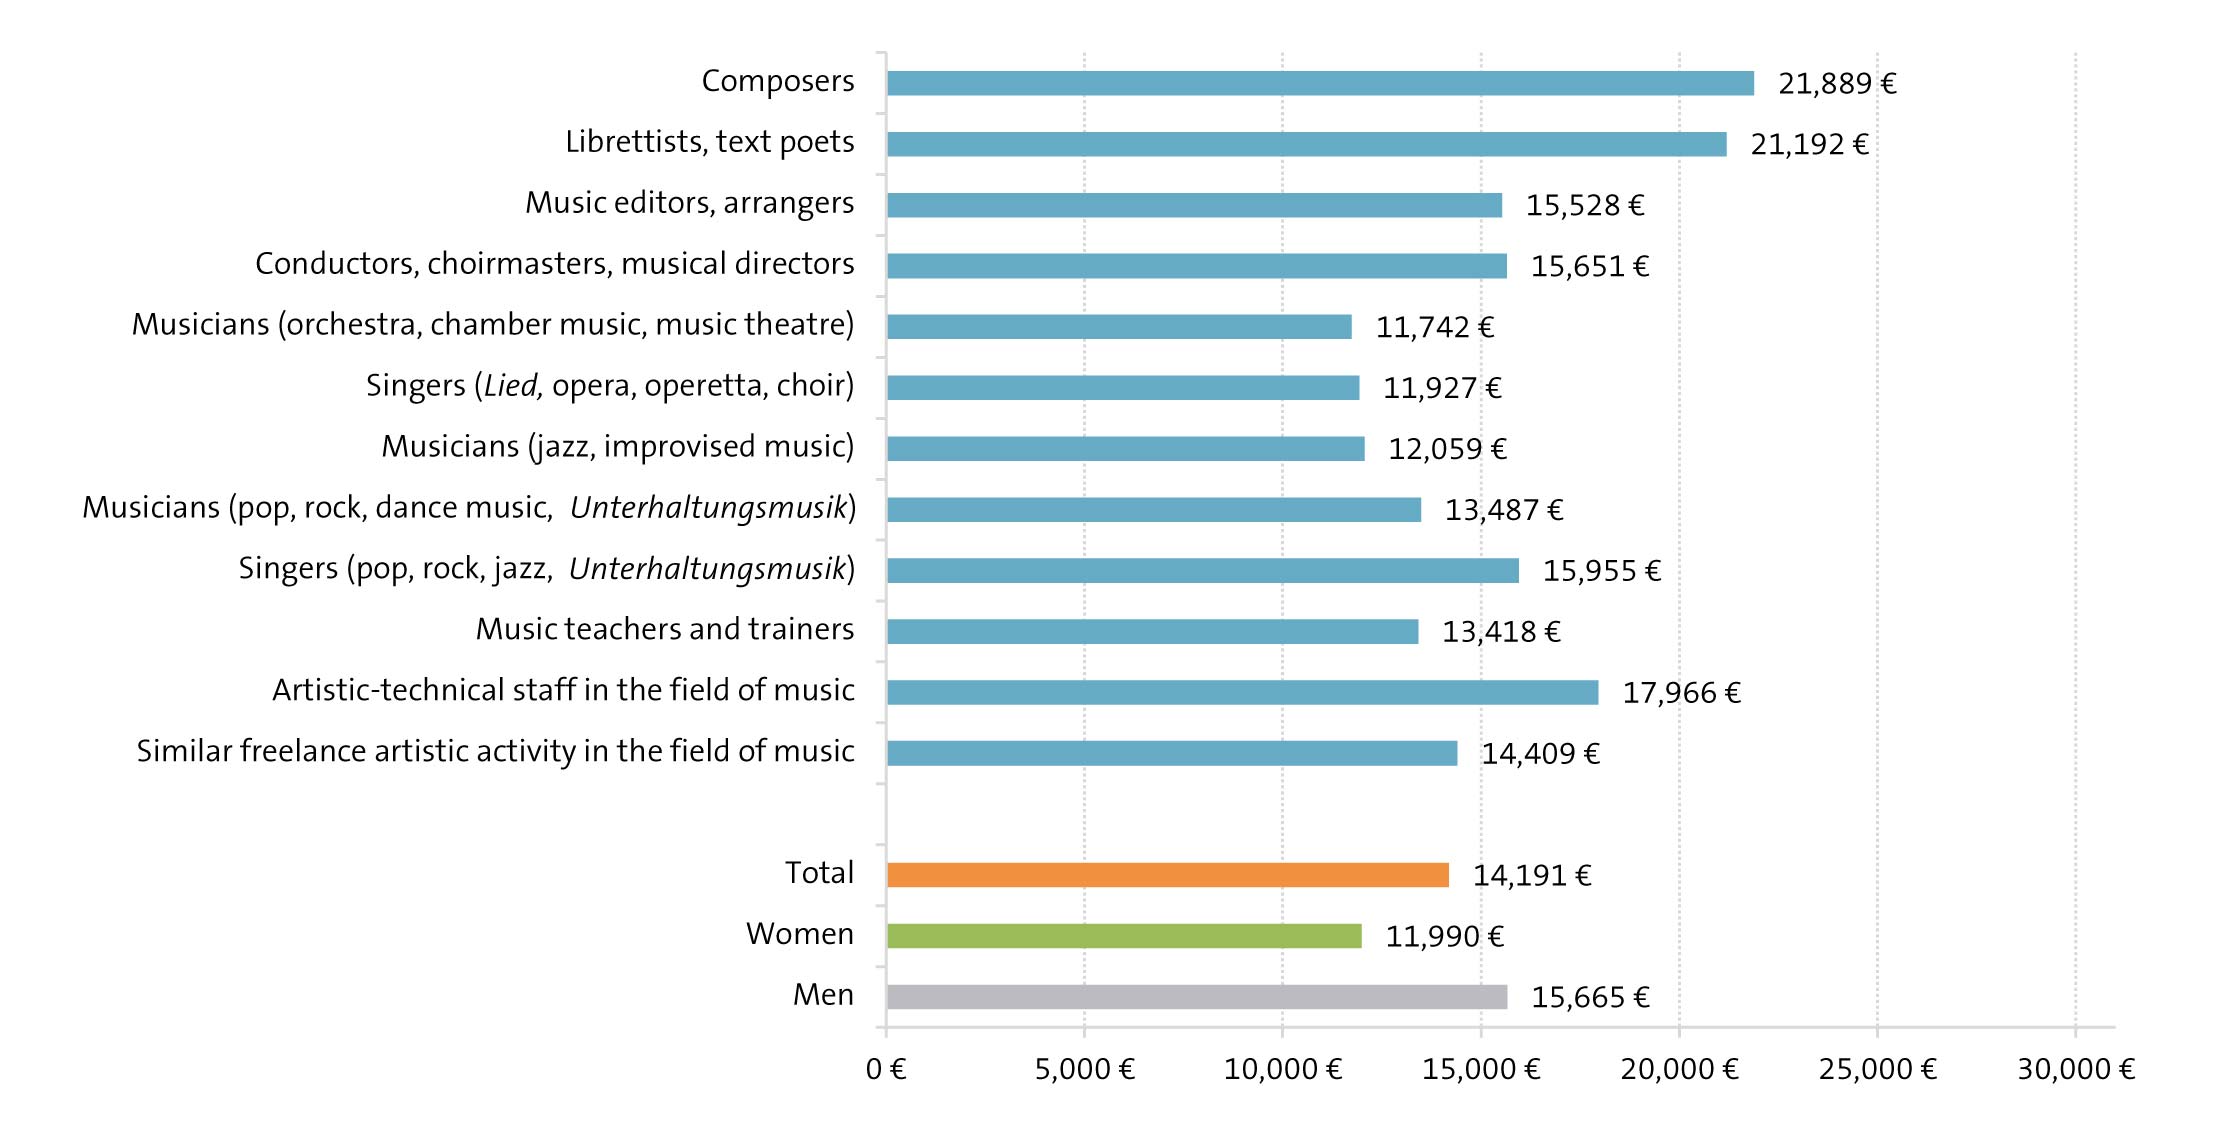 Figure: Average annual income from artistic work of the freelance artists insured in der KSK, music section 2022